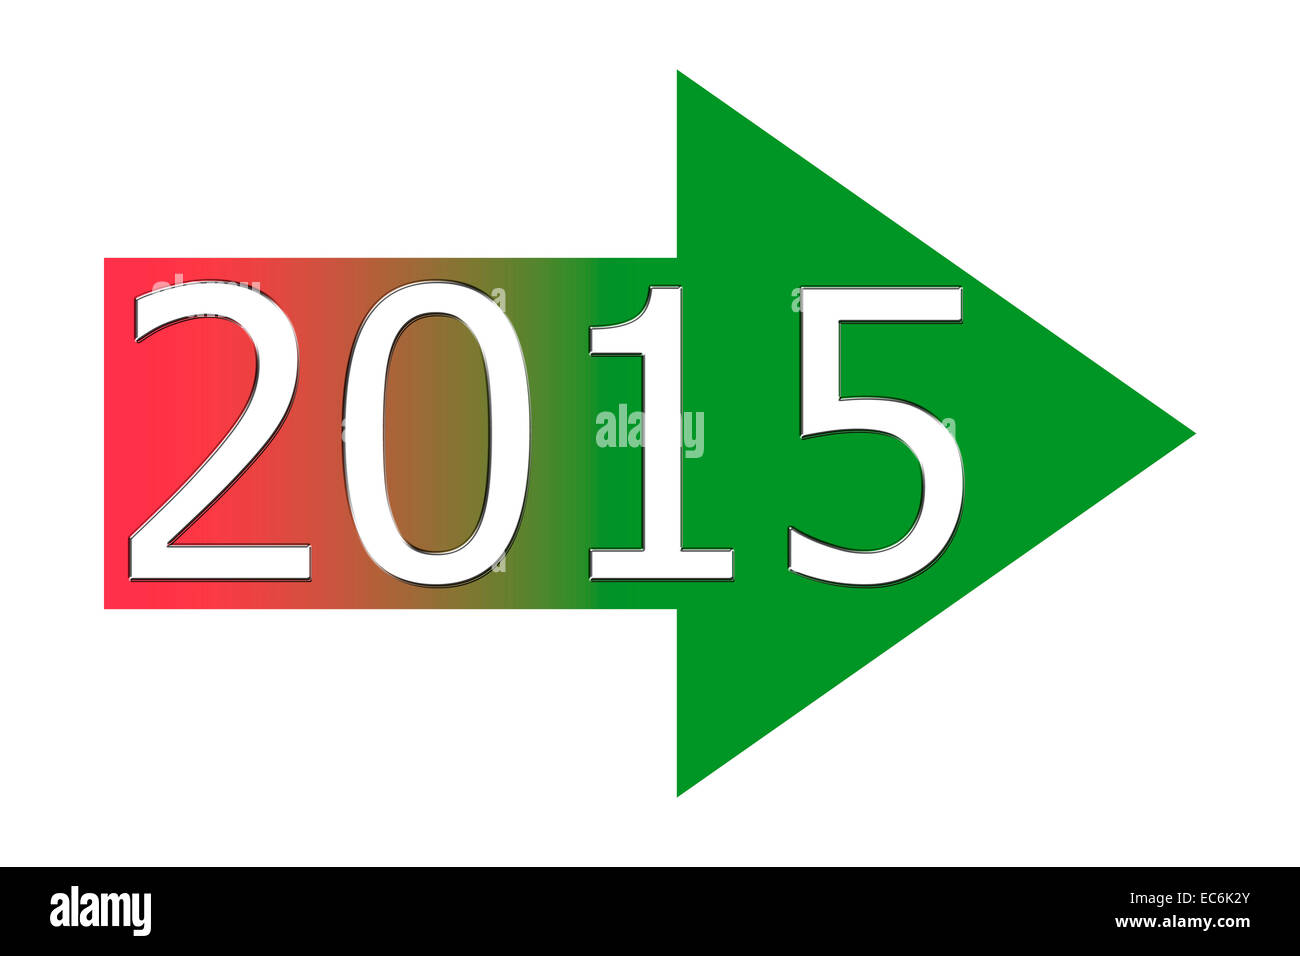 2015 arrow to the right side with color gradient Stock Photo